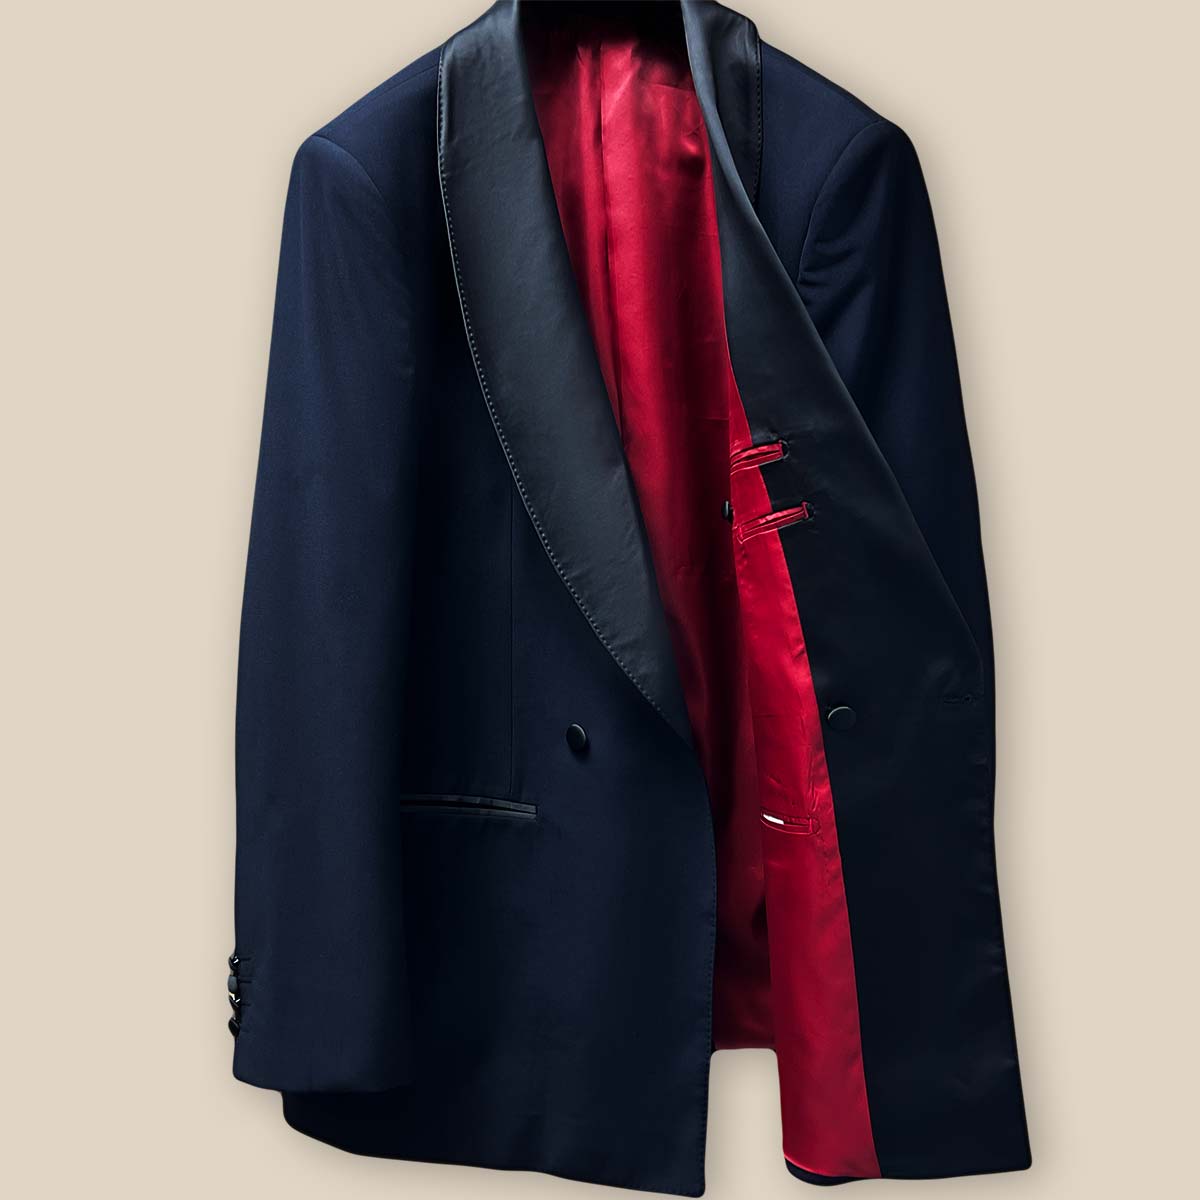 Inside view of the left side of the jacket, highlighting the luxurious tomato red Bemberg lining and interior pocket.